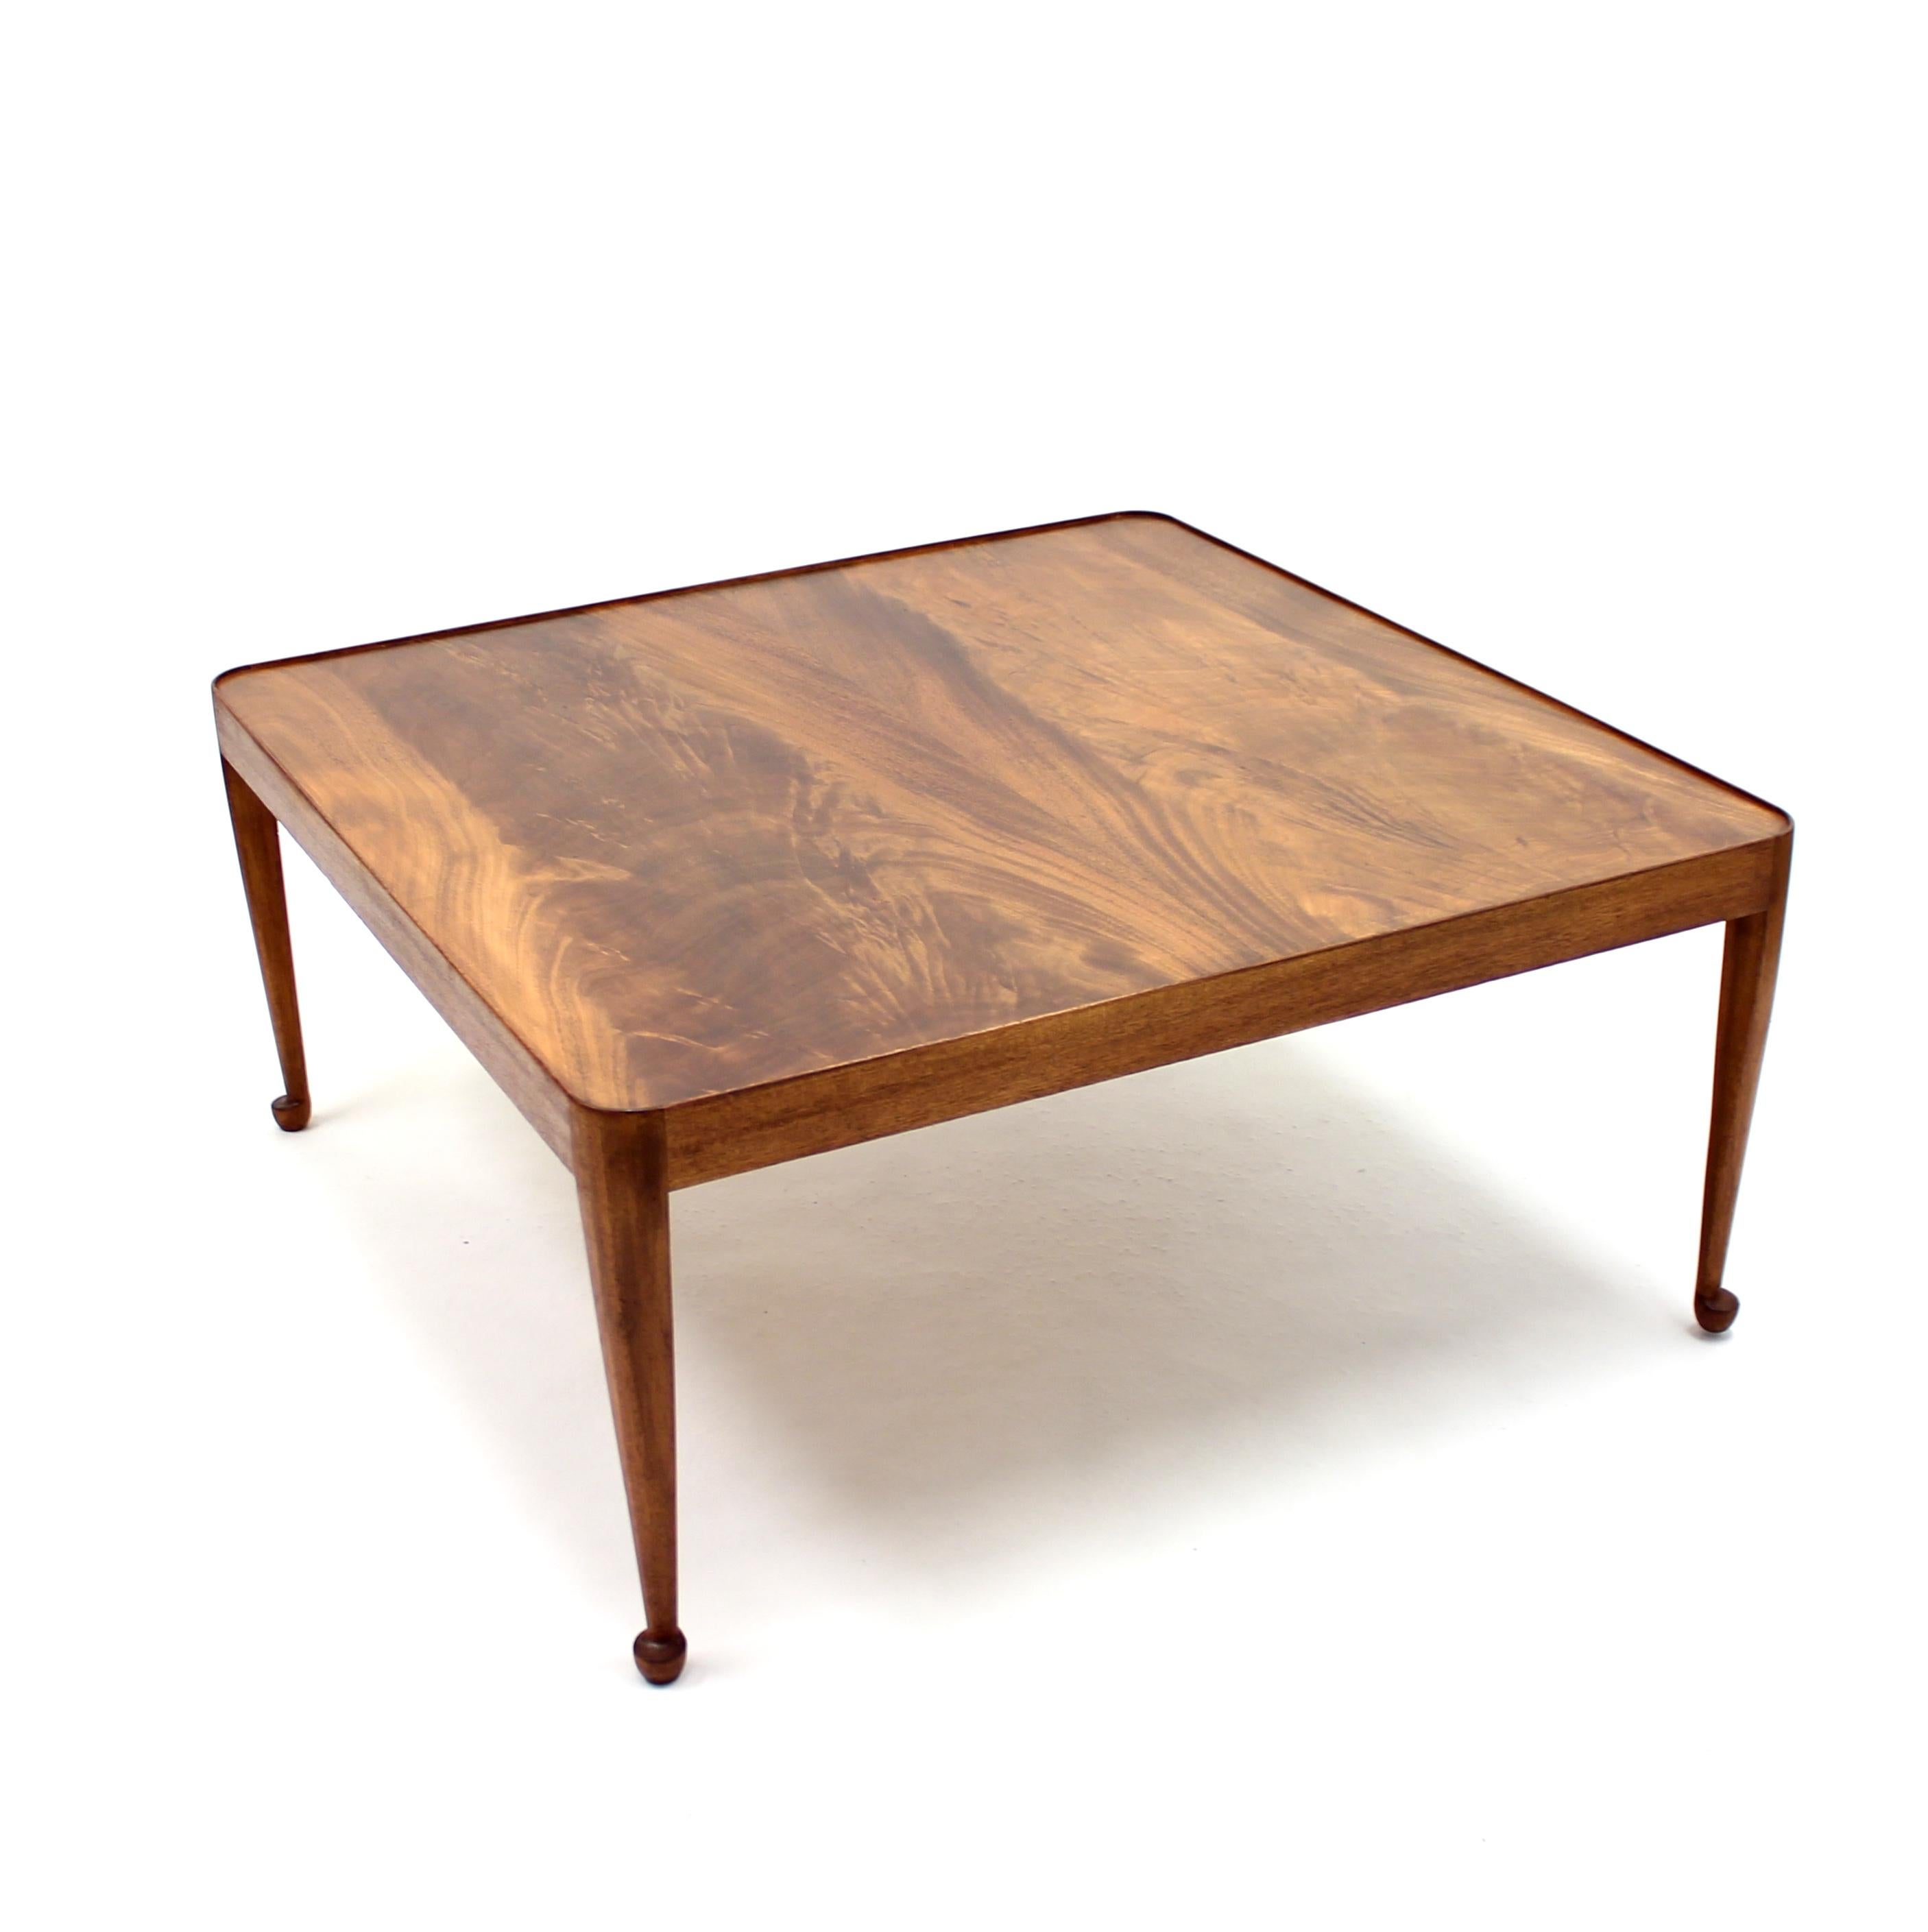 Diplomat coffee table, model 2073, in pyramid mahogany by Josef Frank for Svenskt Tenn. The table was designed in 1949 and was initially often used at Swedish embassies around the world. After that it was often referred to as the Diplomat table and